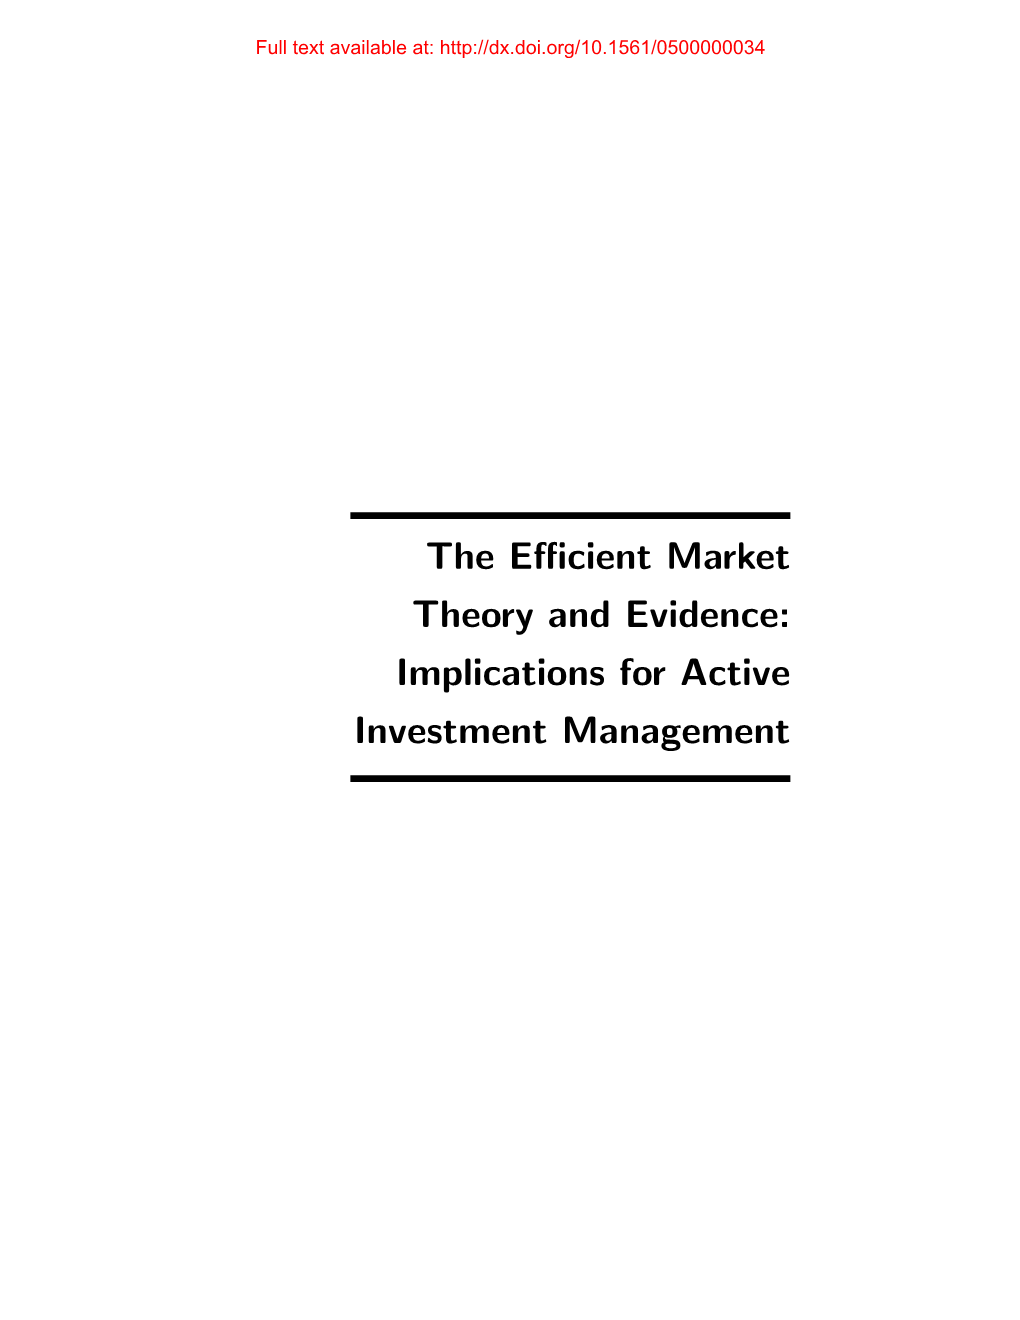 The Efficient Market Theory and Evidence: Implications for Active